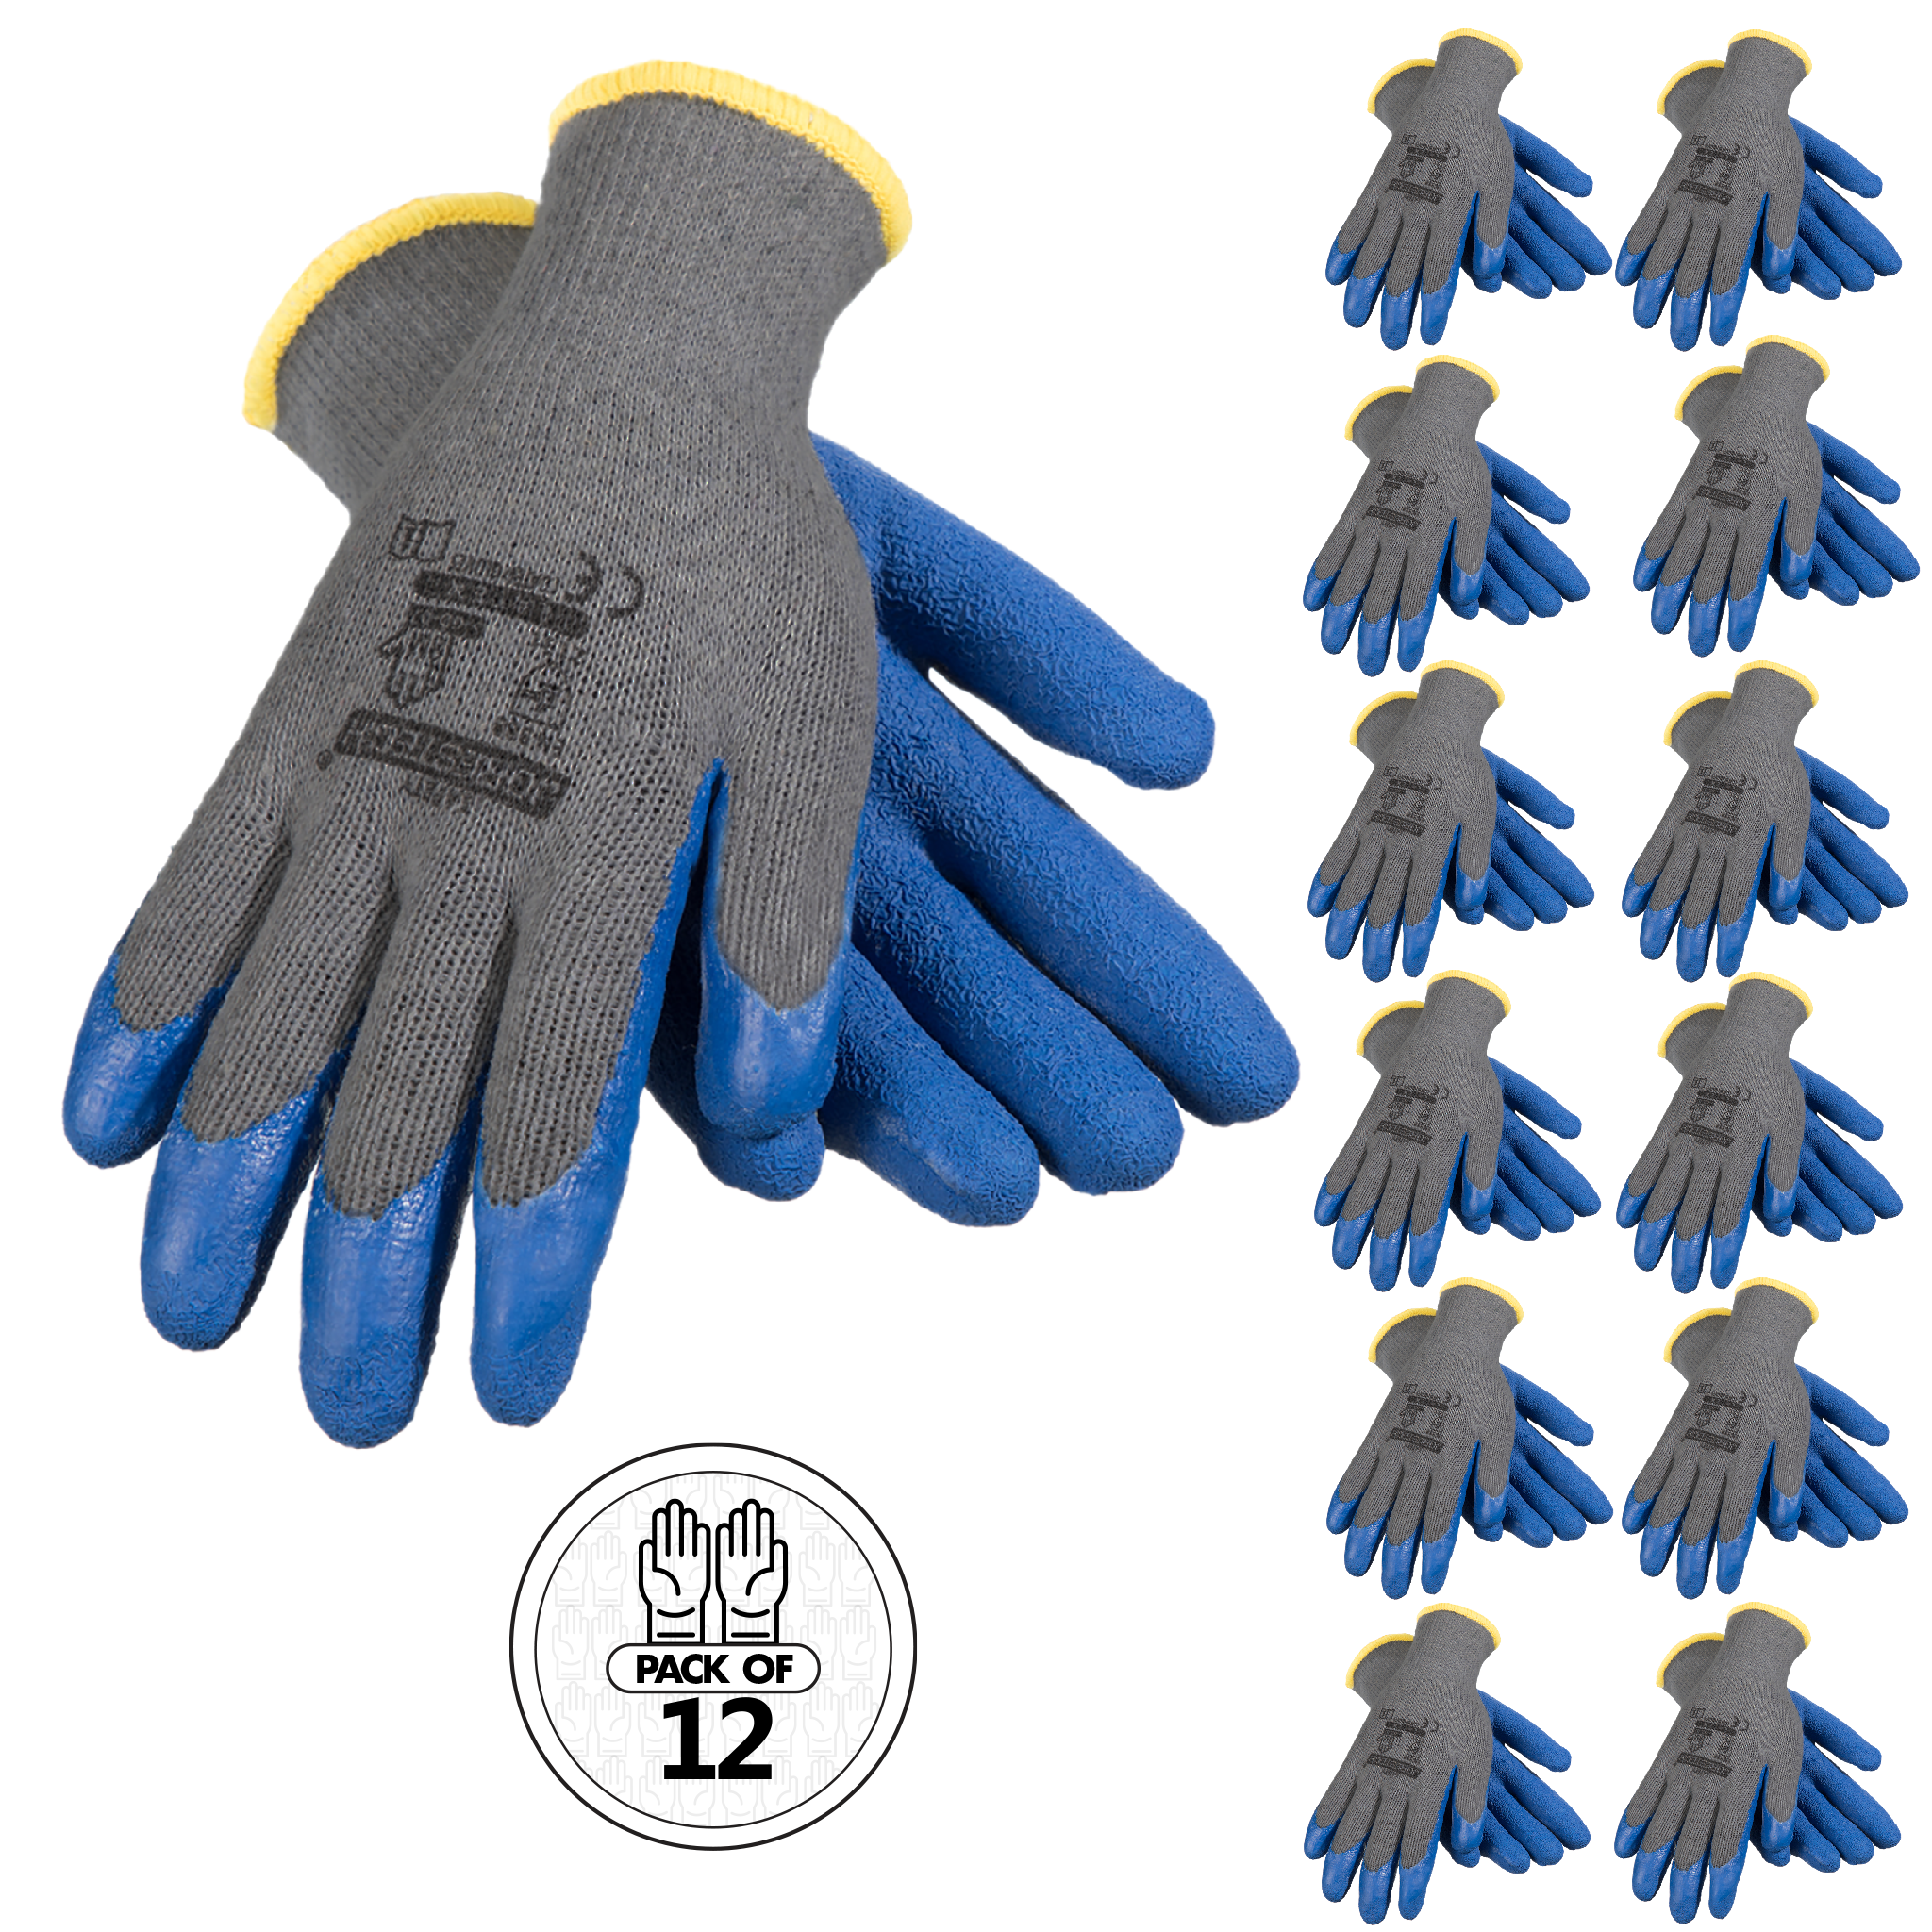 Potchen 36 Pairs Work Gloves for Men Safety Work Gloves Bulk Gardening  Gloves Construction Gloves with Nitrile Coated on Palm and Fingers for  Women